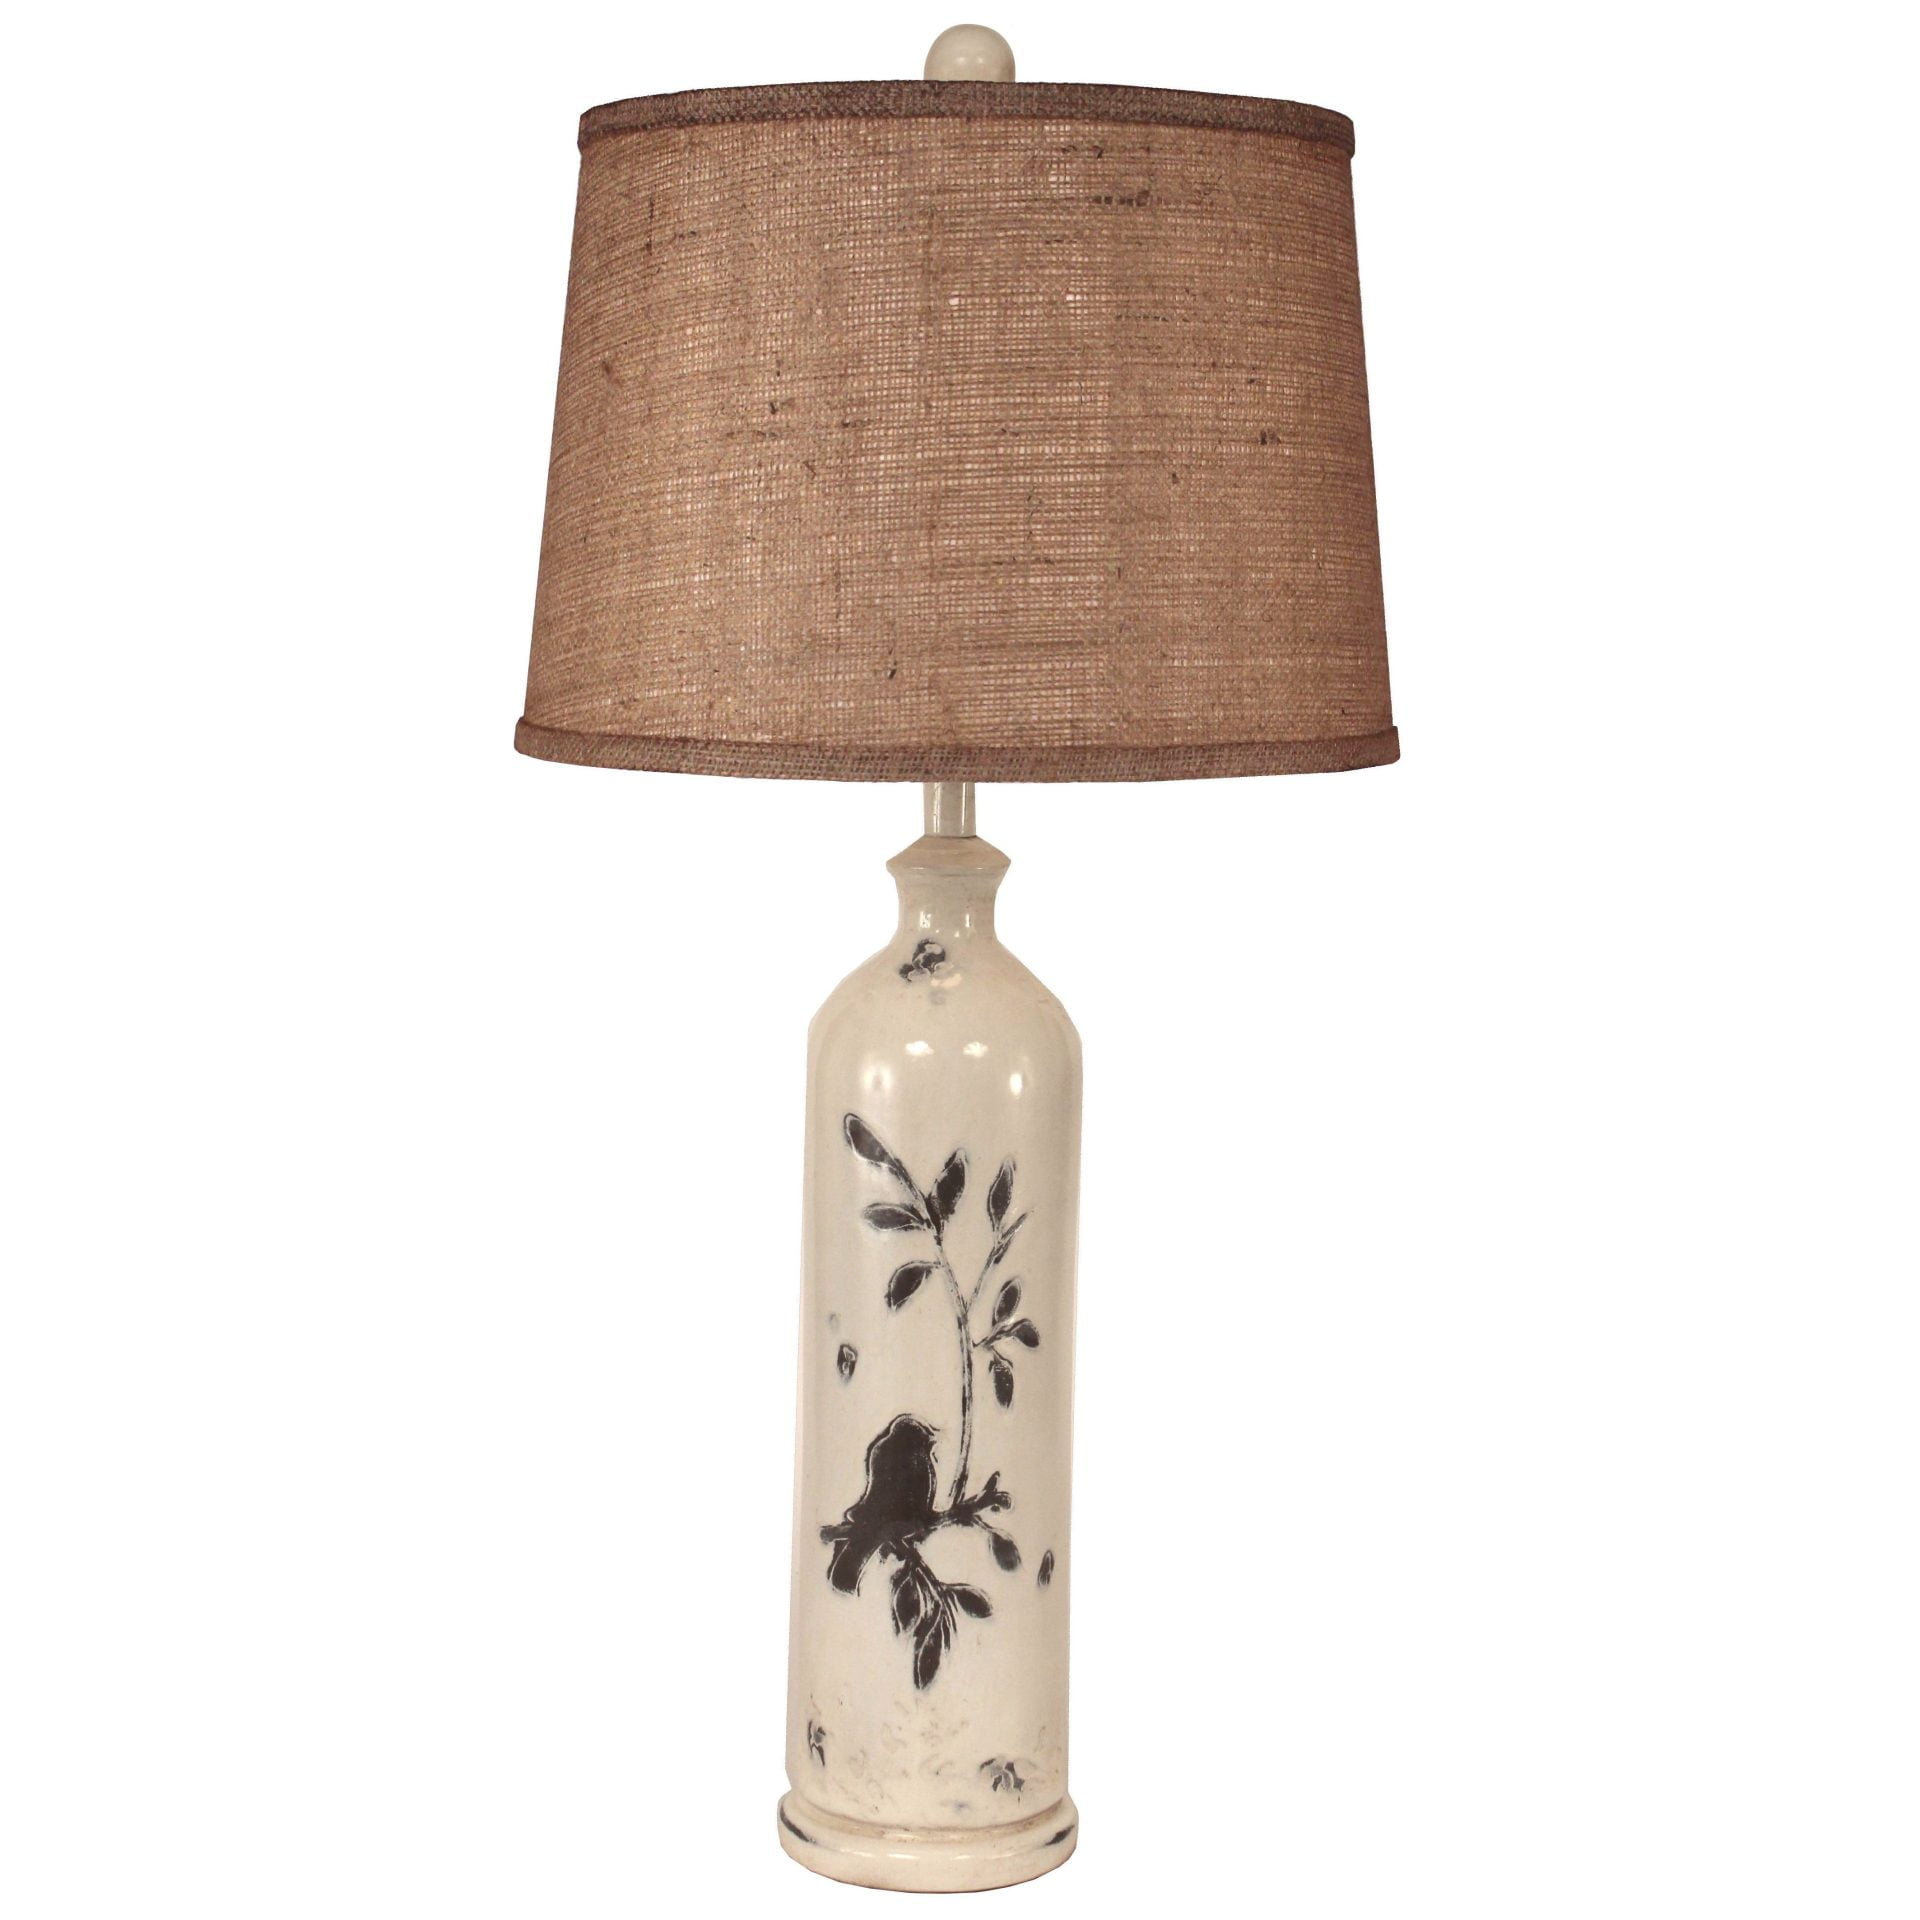 Tall Birds on a Branch Table Lamp